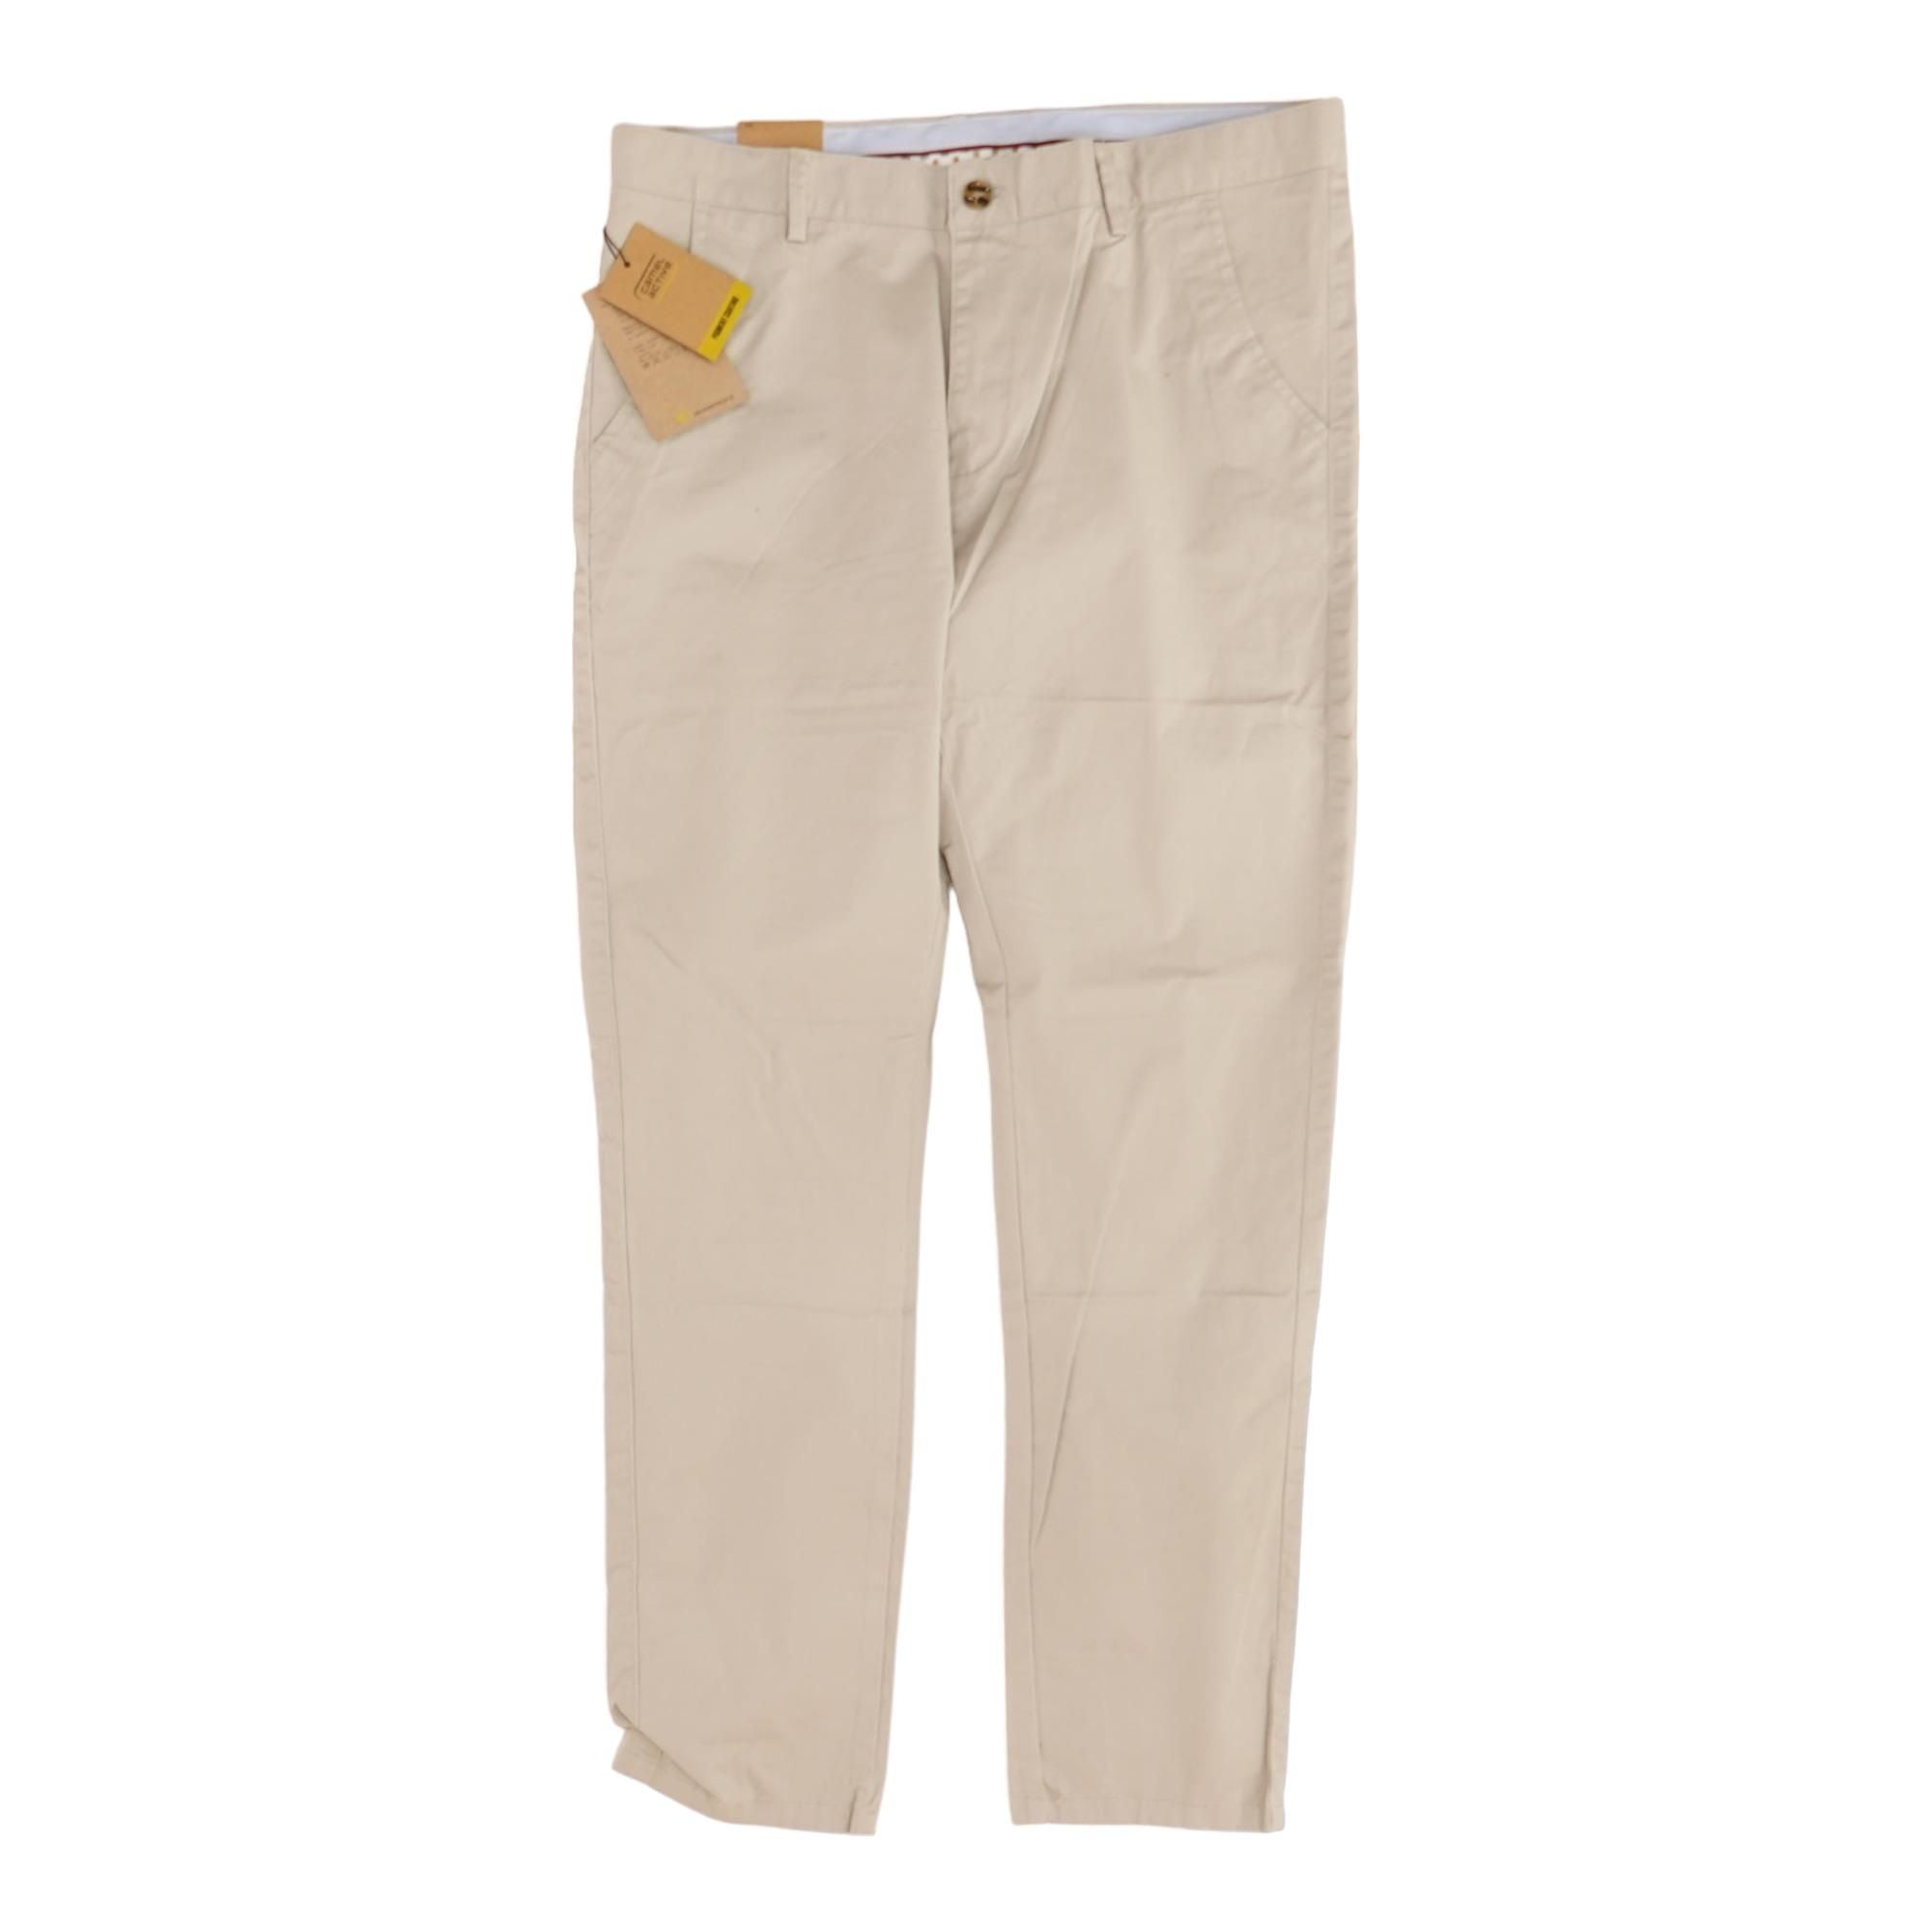 Khaki Solid Chino Pants – Unclaimed Baggage